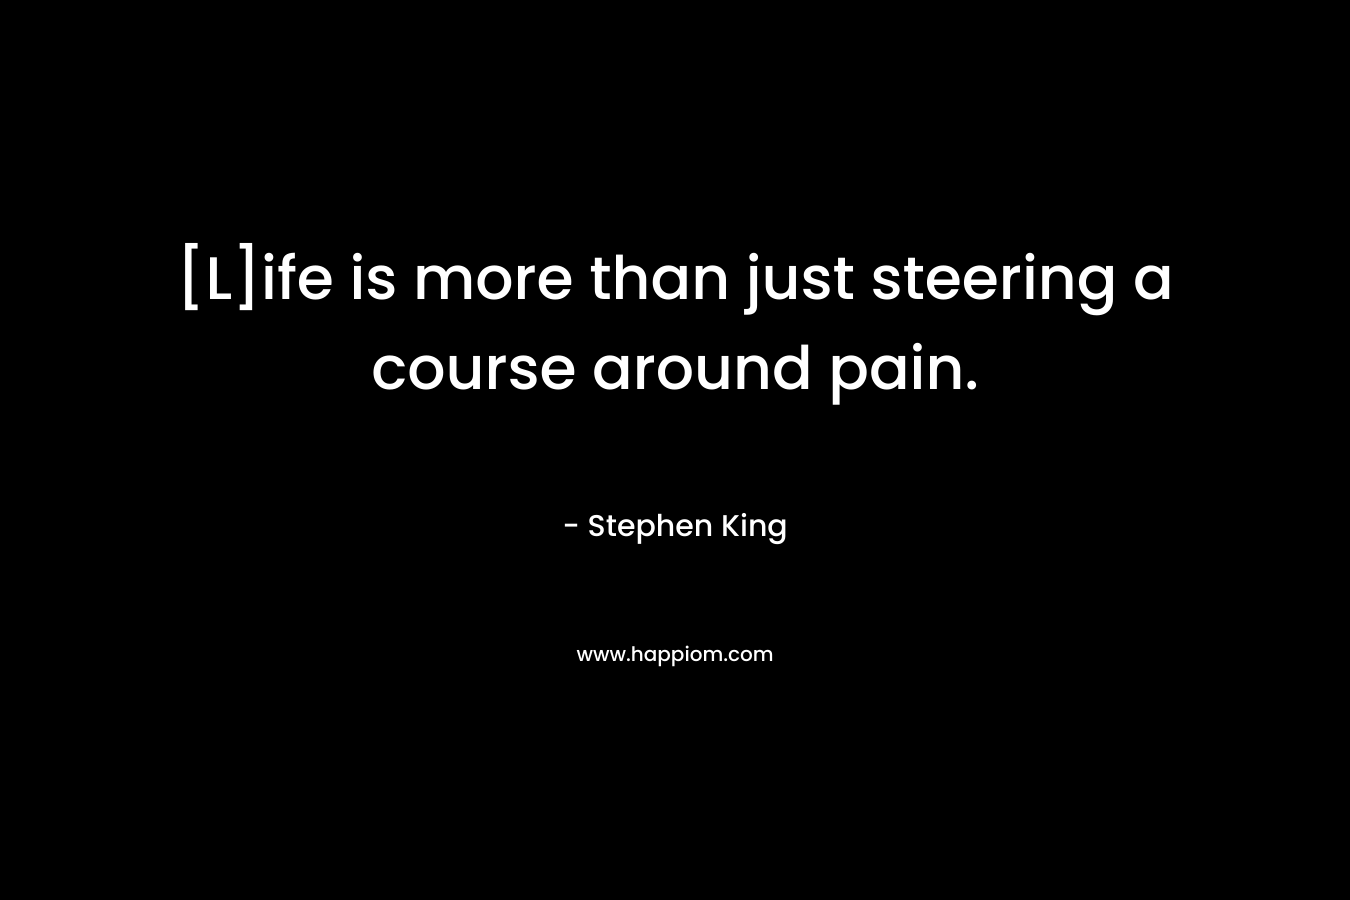 [L]ife is more than just steering a course around pain. – Stephen King